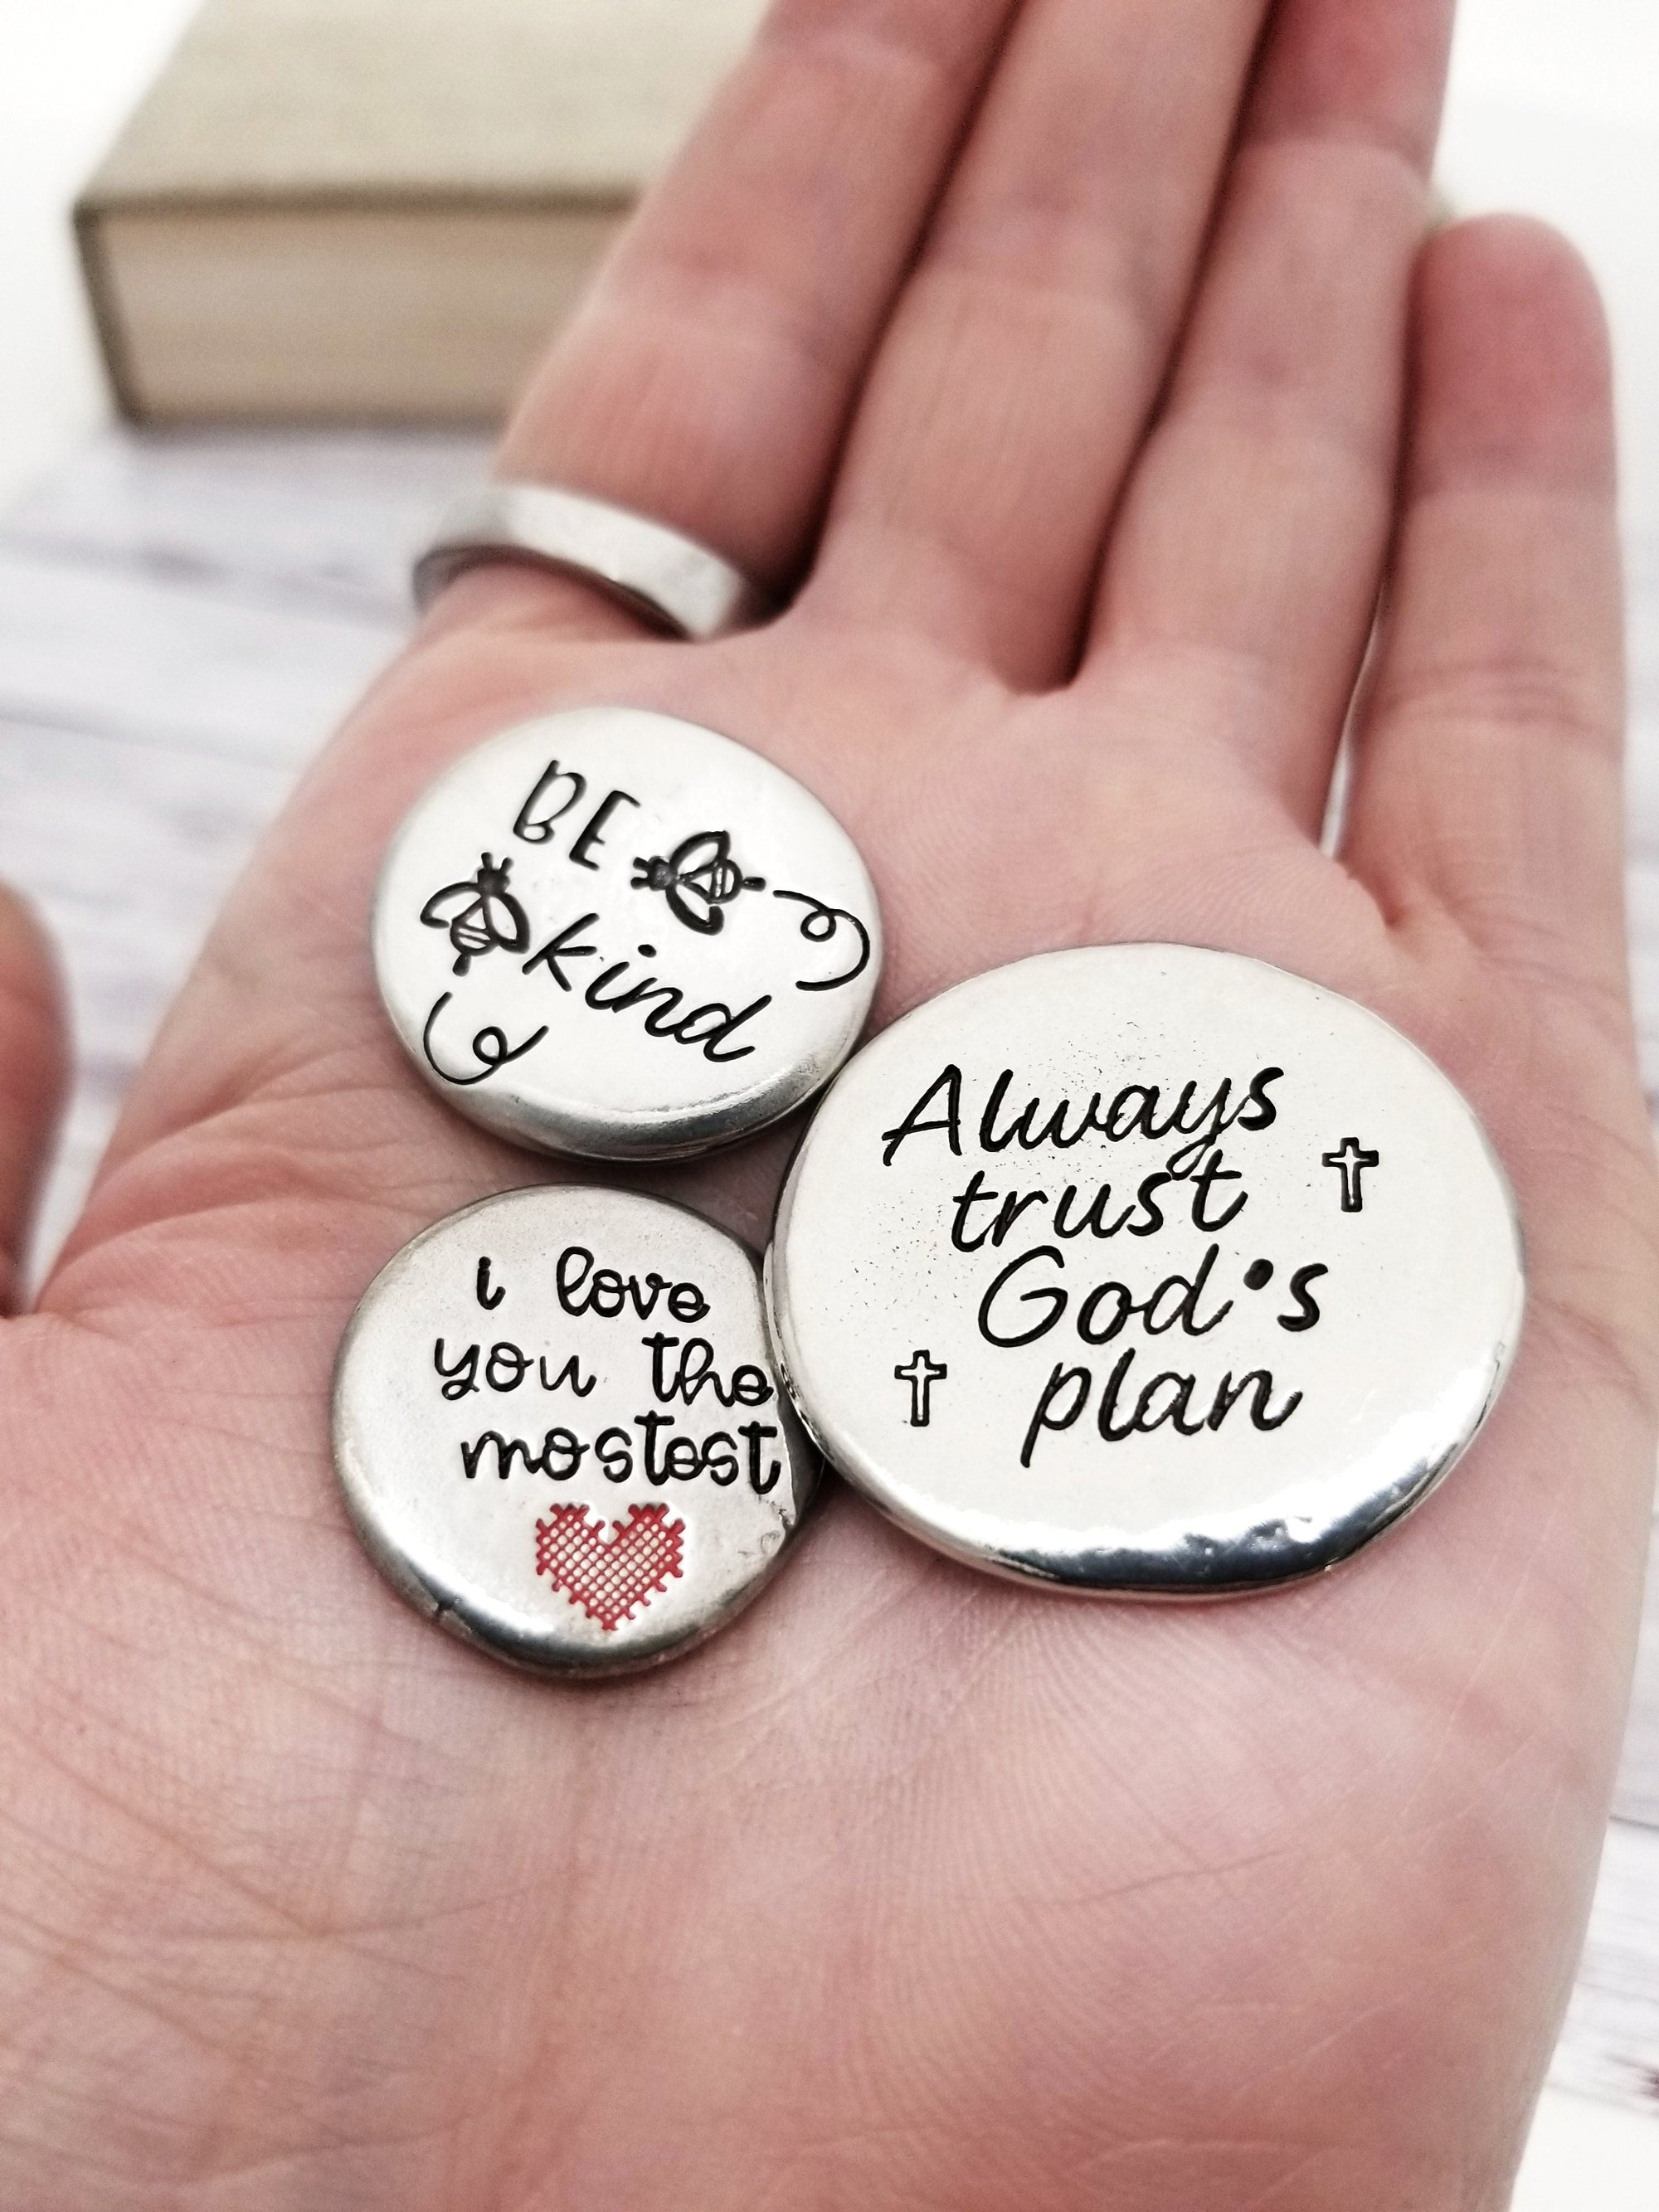 Personalized Serenity Stone Keep Calm and Carry On Mini Pocket Love Charm A Token of Affection Engraved Encouragement for Every Day